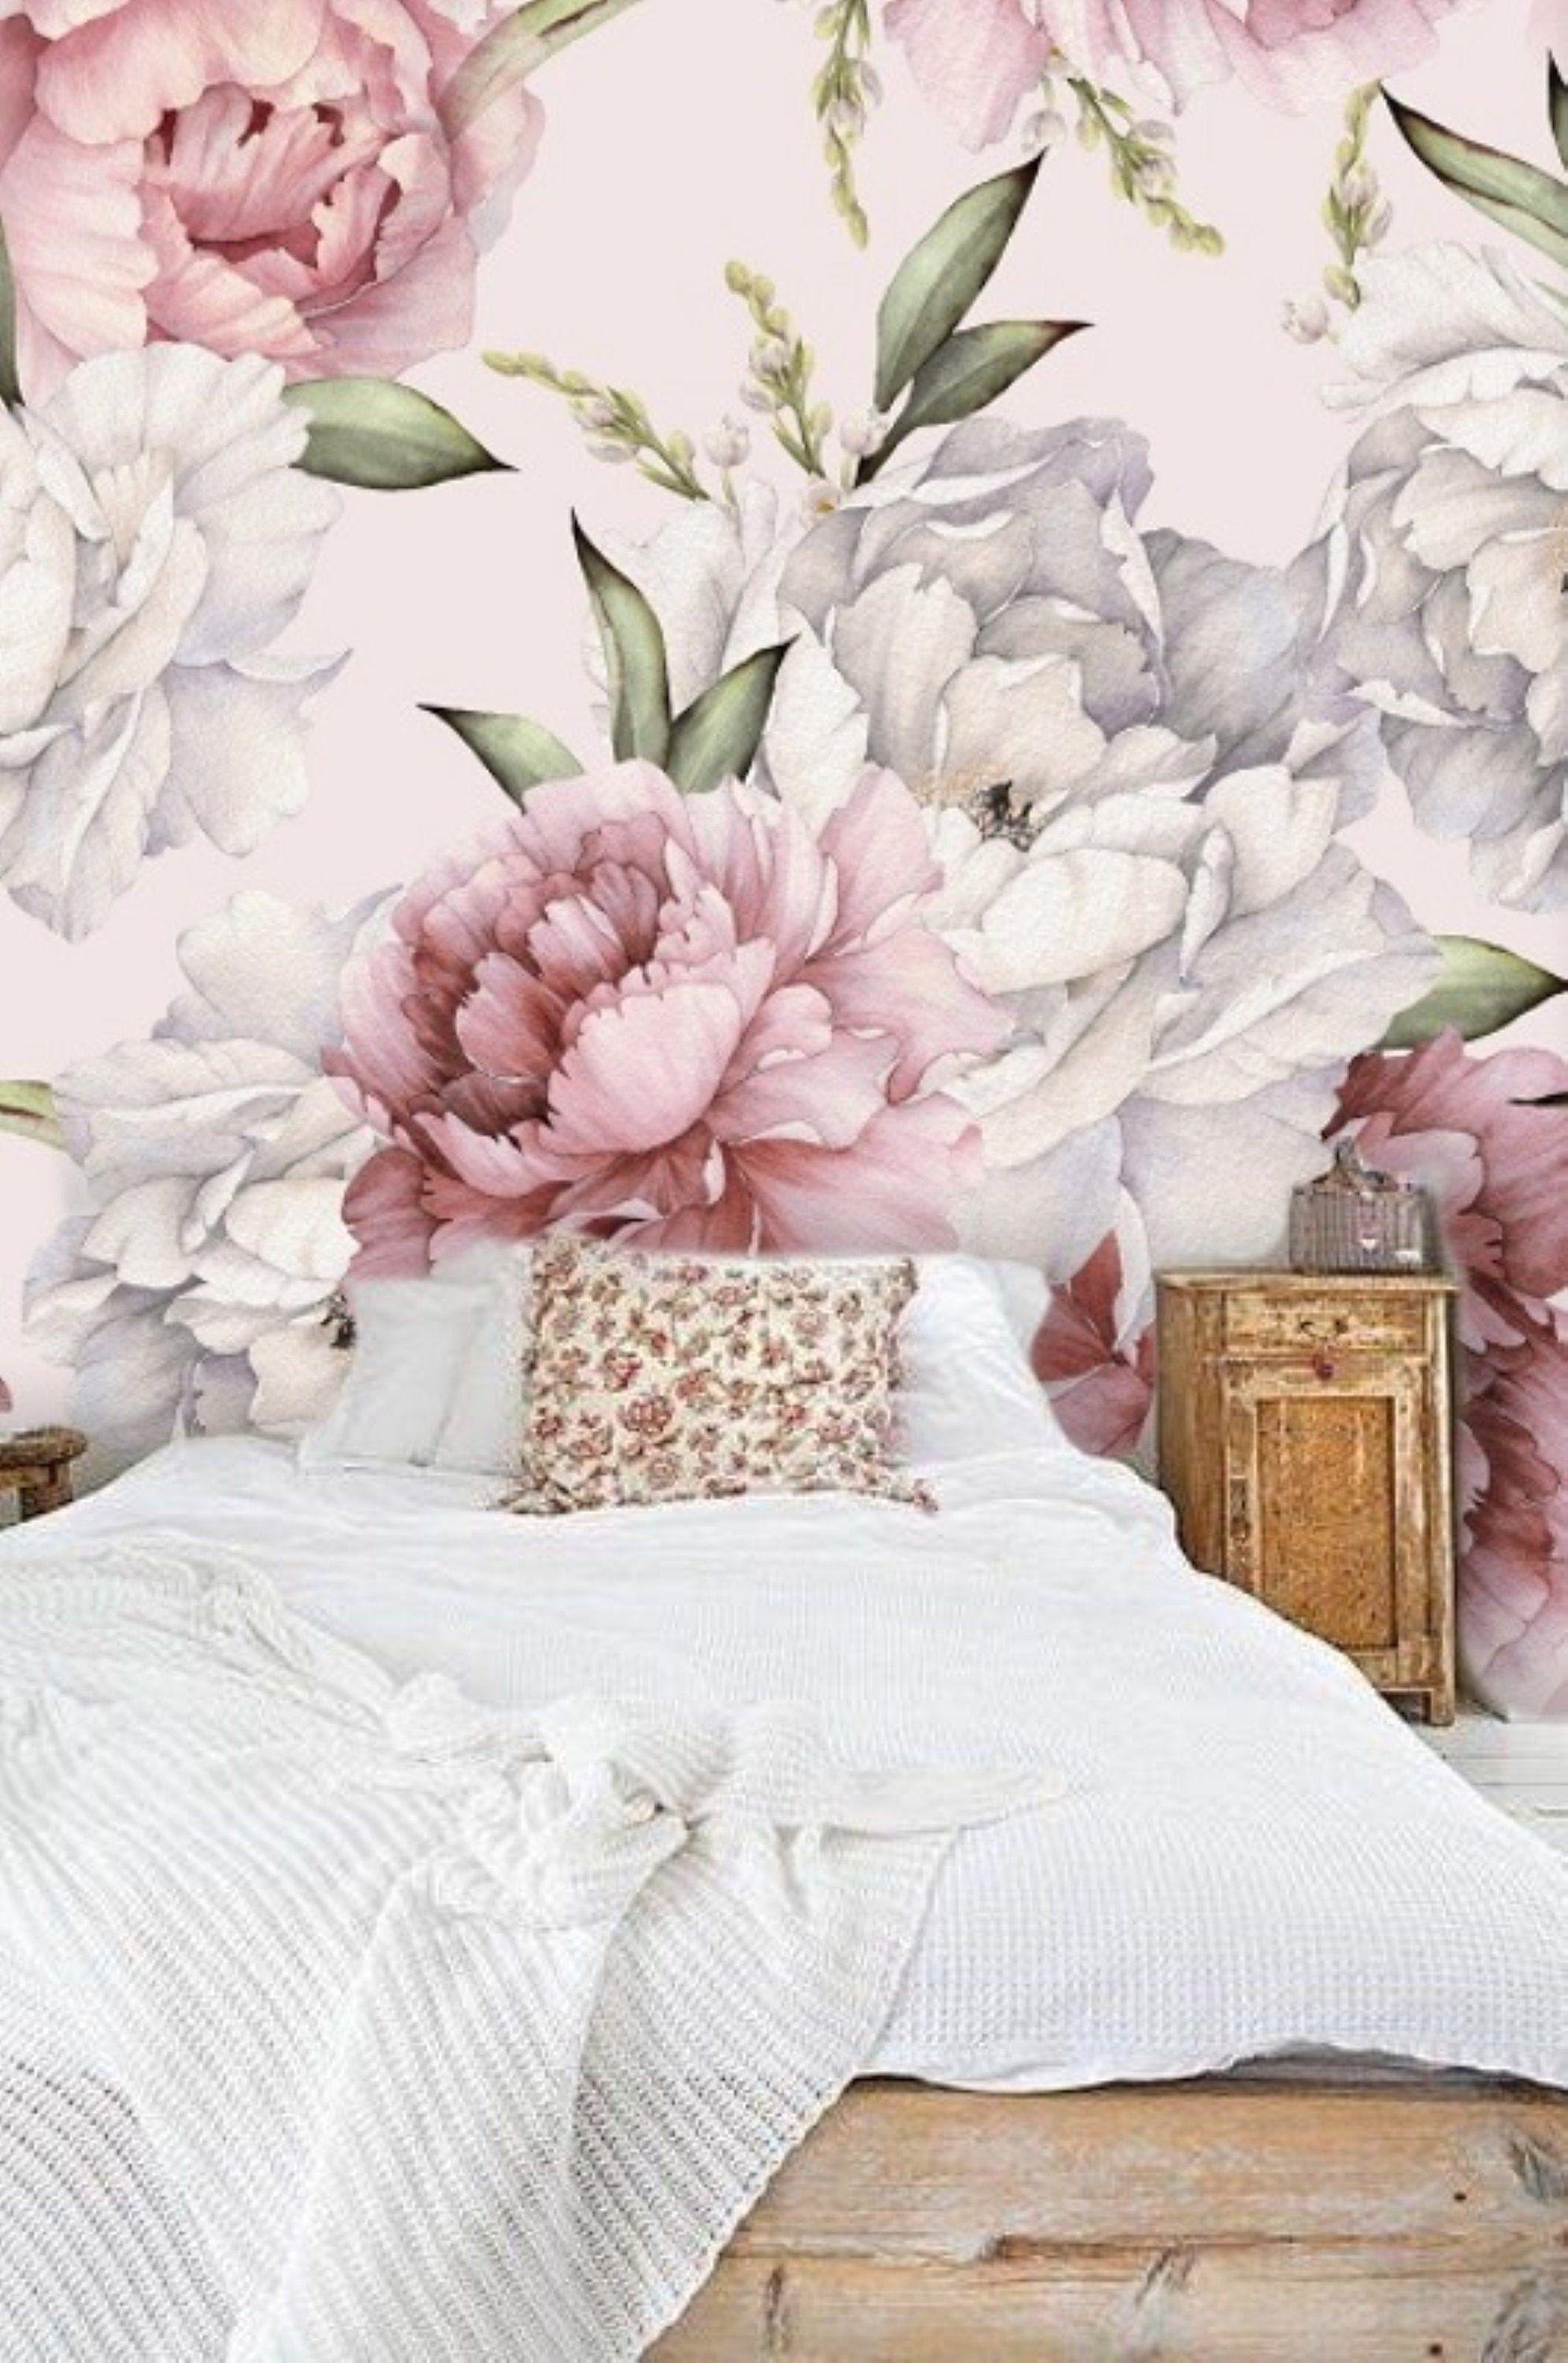 1991 x 3000 · jpeg - Large Peony Flower Removable Wallpaper Peel and Stick | Etsy | Wall ...